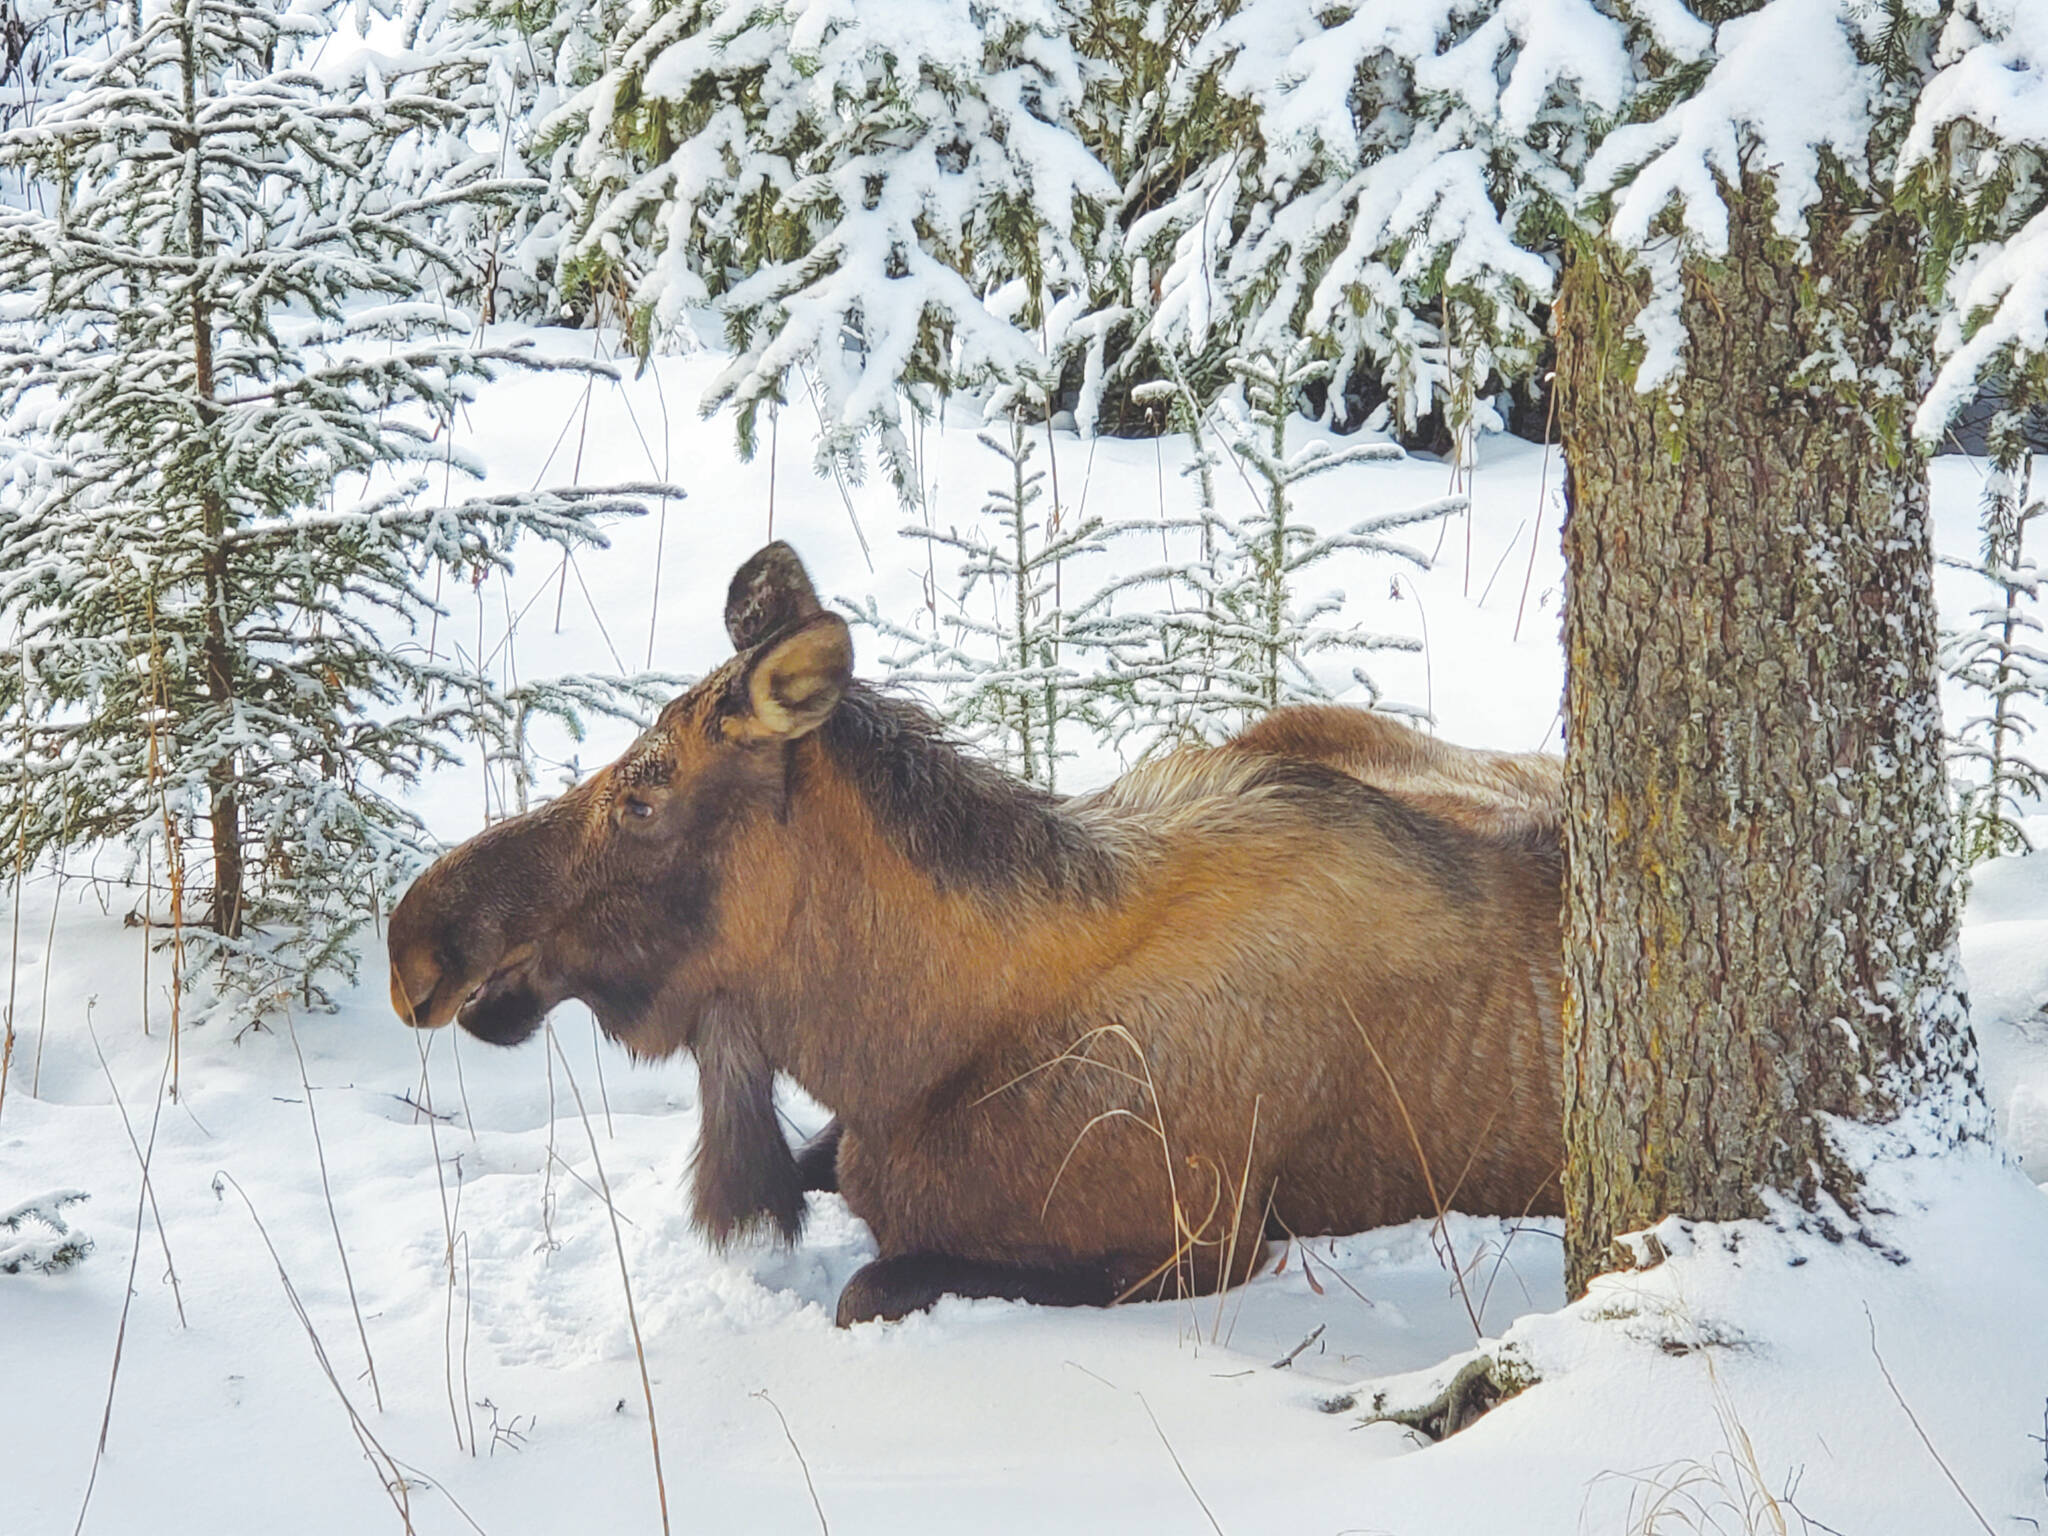 Photo by Delcenia Cosman/Homer News
An adult female moose rests in the snow under a spruce tree Jan. 18 in Anchor Point.